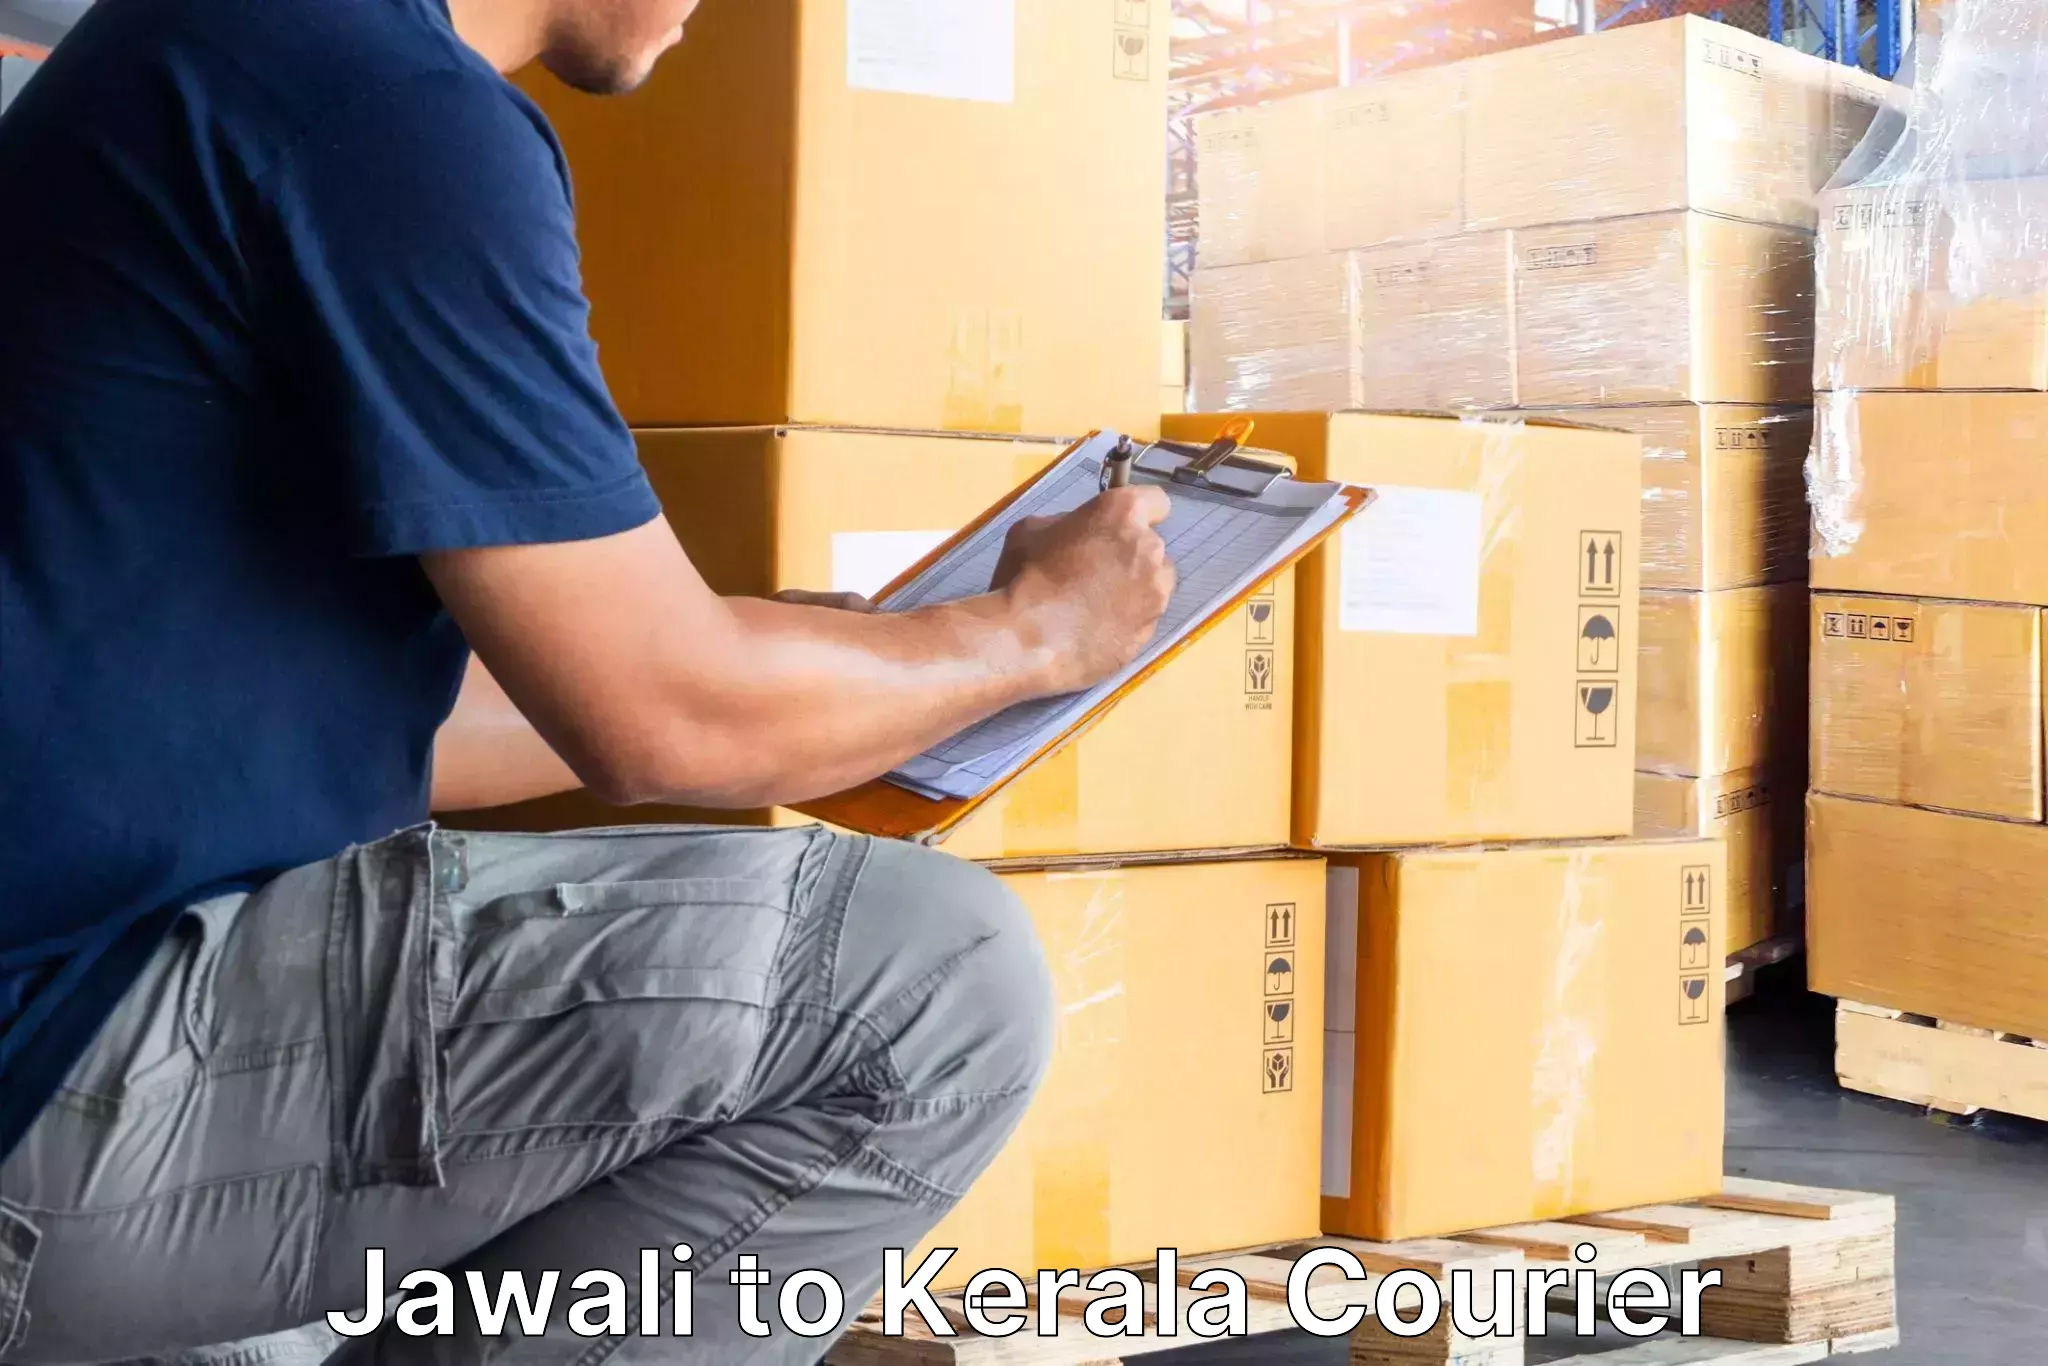 Furniture delivery service Jawali to Kollam